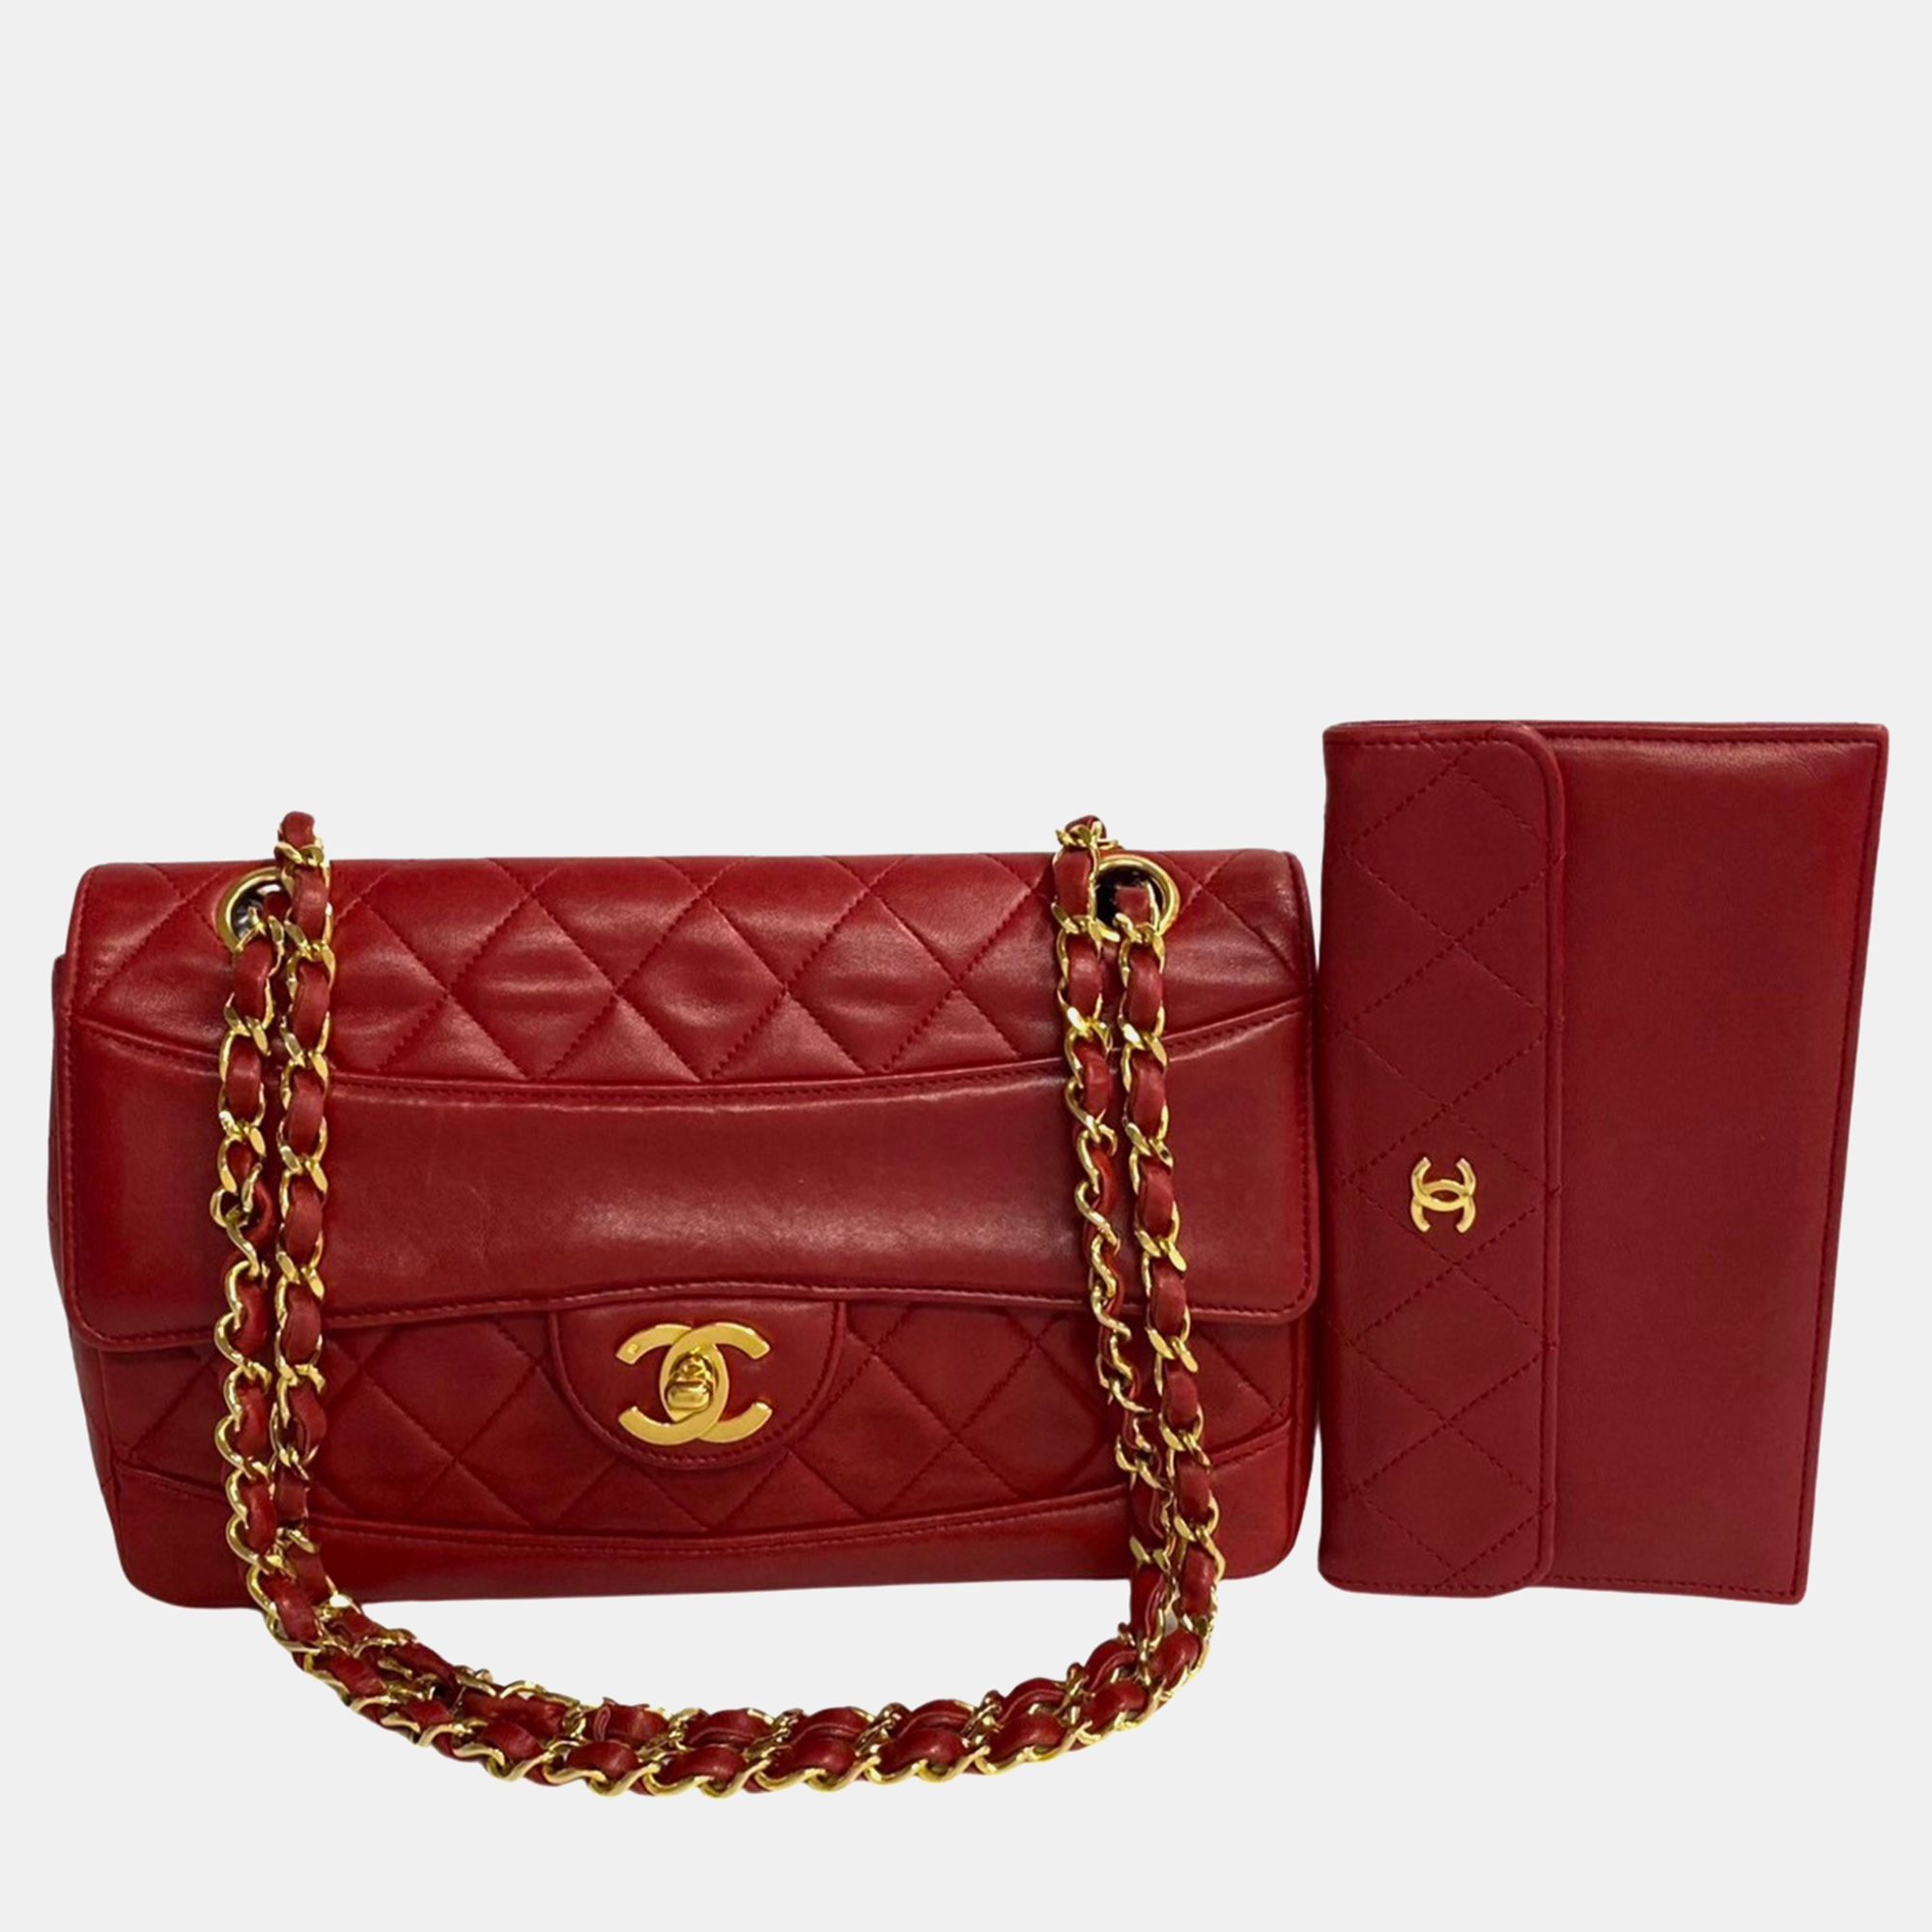 Pre-owned Chanel Red Leather Cc Quilted Flap Bag